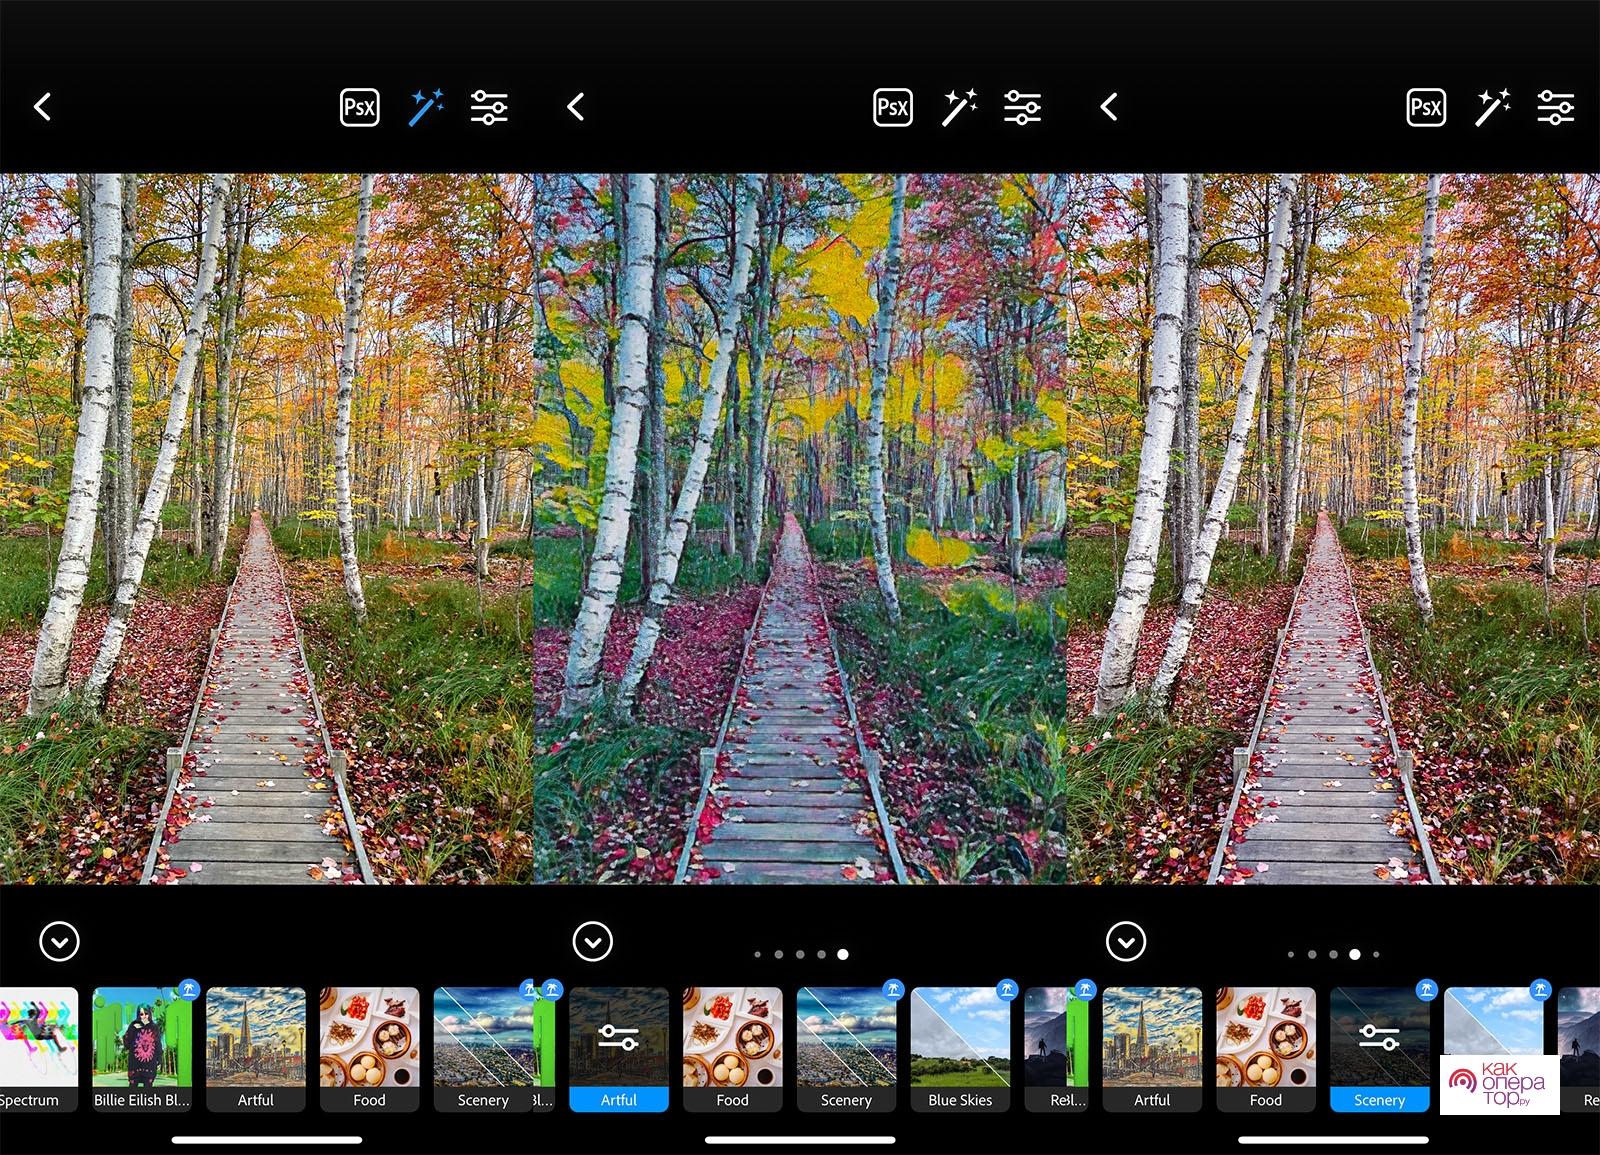 Adobe Photoshop Camera app released for Android and iOS, offering AI-powered 'Lenses': Digital Photography Review